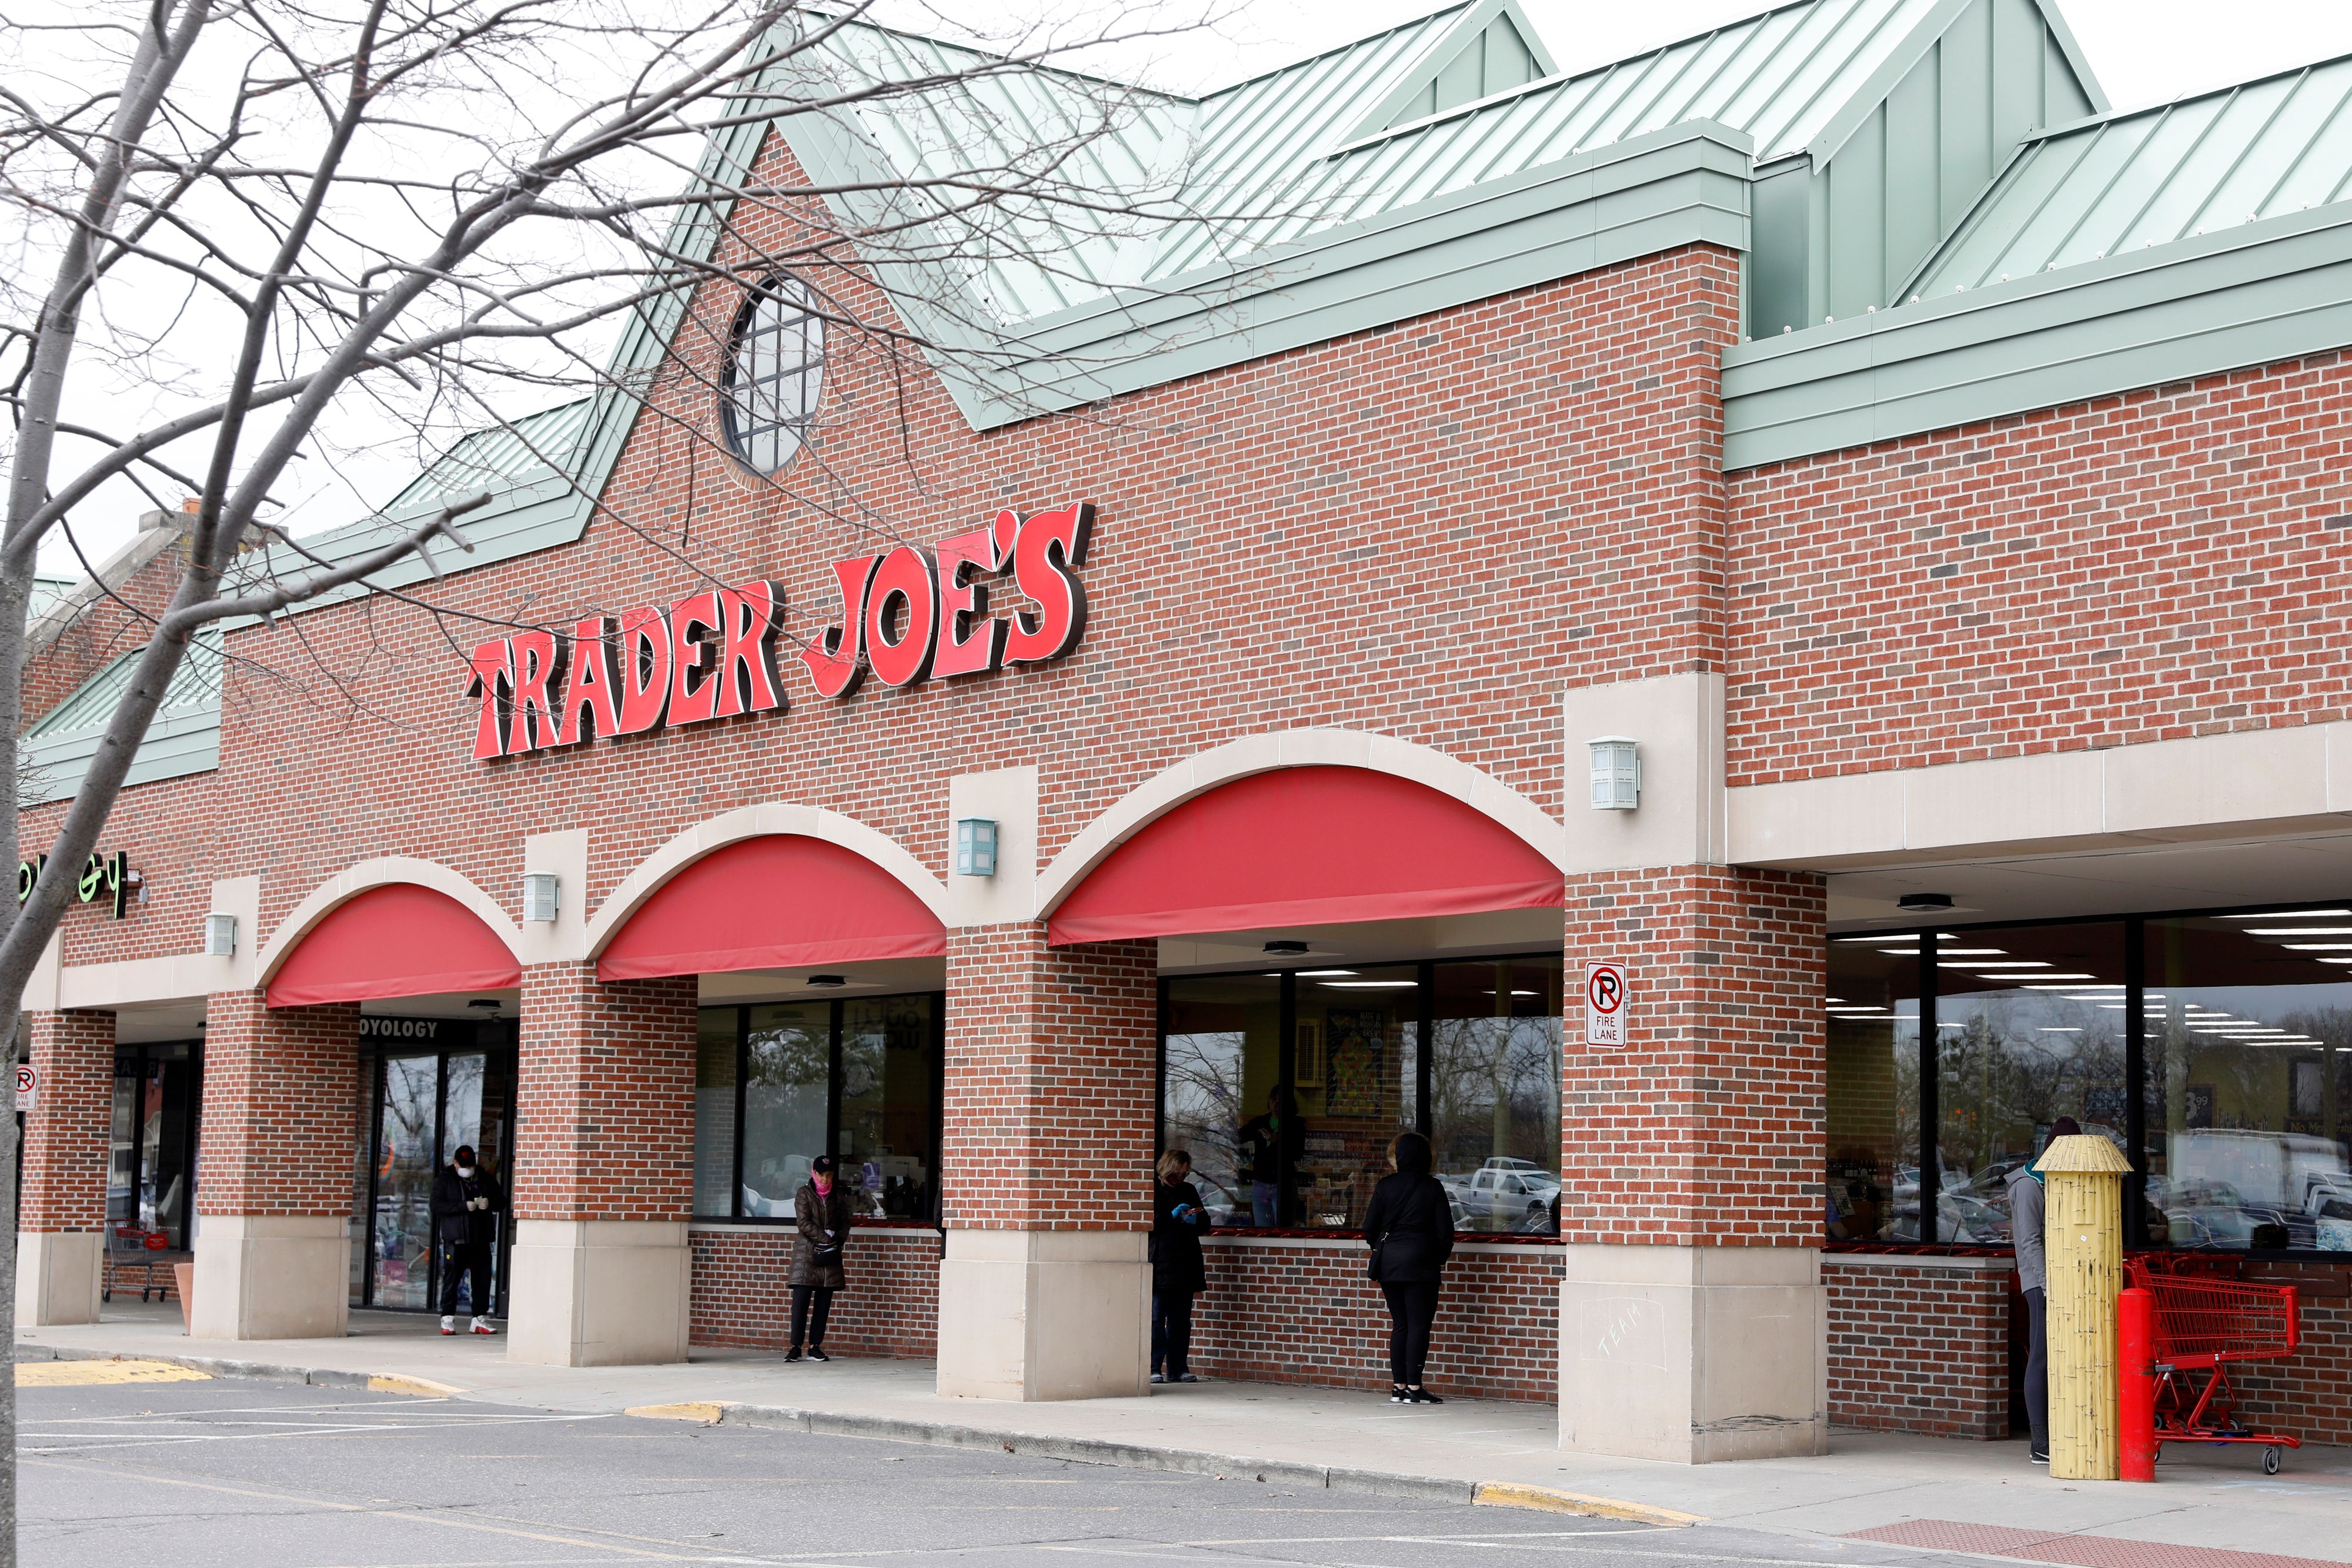 People social distance as they wait to get into the Trader Joe's store to avoid the spread of COVID-19 in Bloomfield Hills Michigan on March 30, 2020. - Trader Joe's only lets 20 customers in the store at a time to shop. (Photo by JEFF KOWALSKY / AFP) (Photo by JEFF KOWALSKY/AFP via Getty Images)